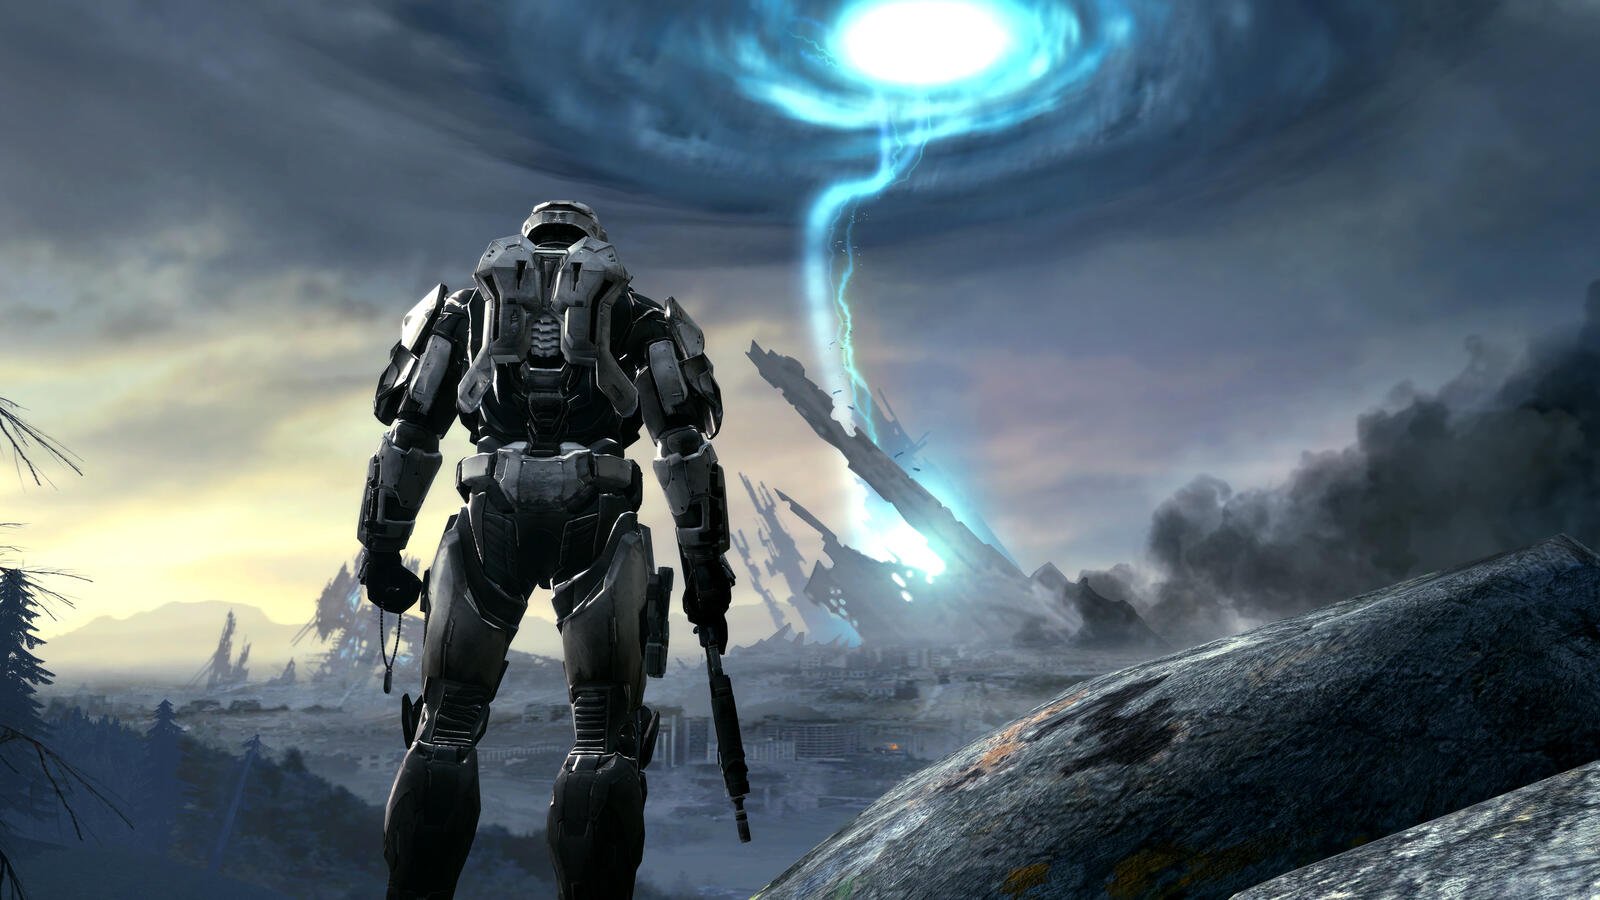 Wallpapers Halo games computer games on the desktop